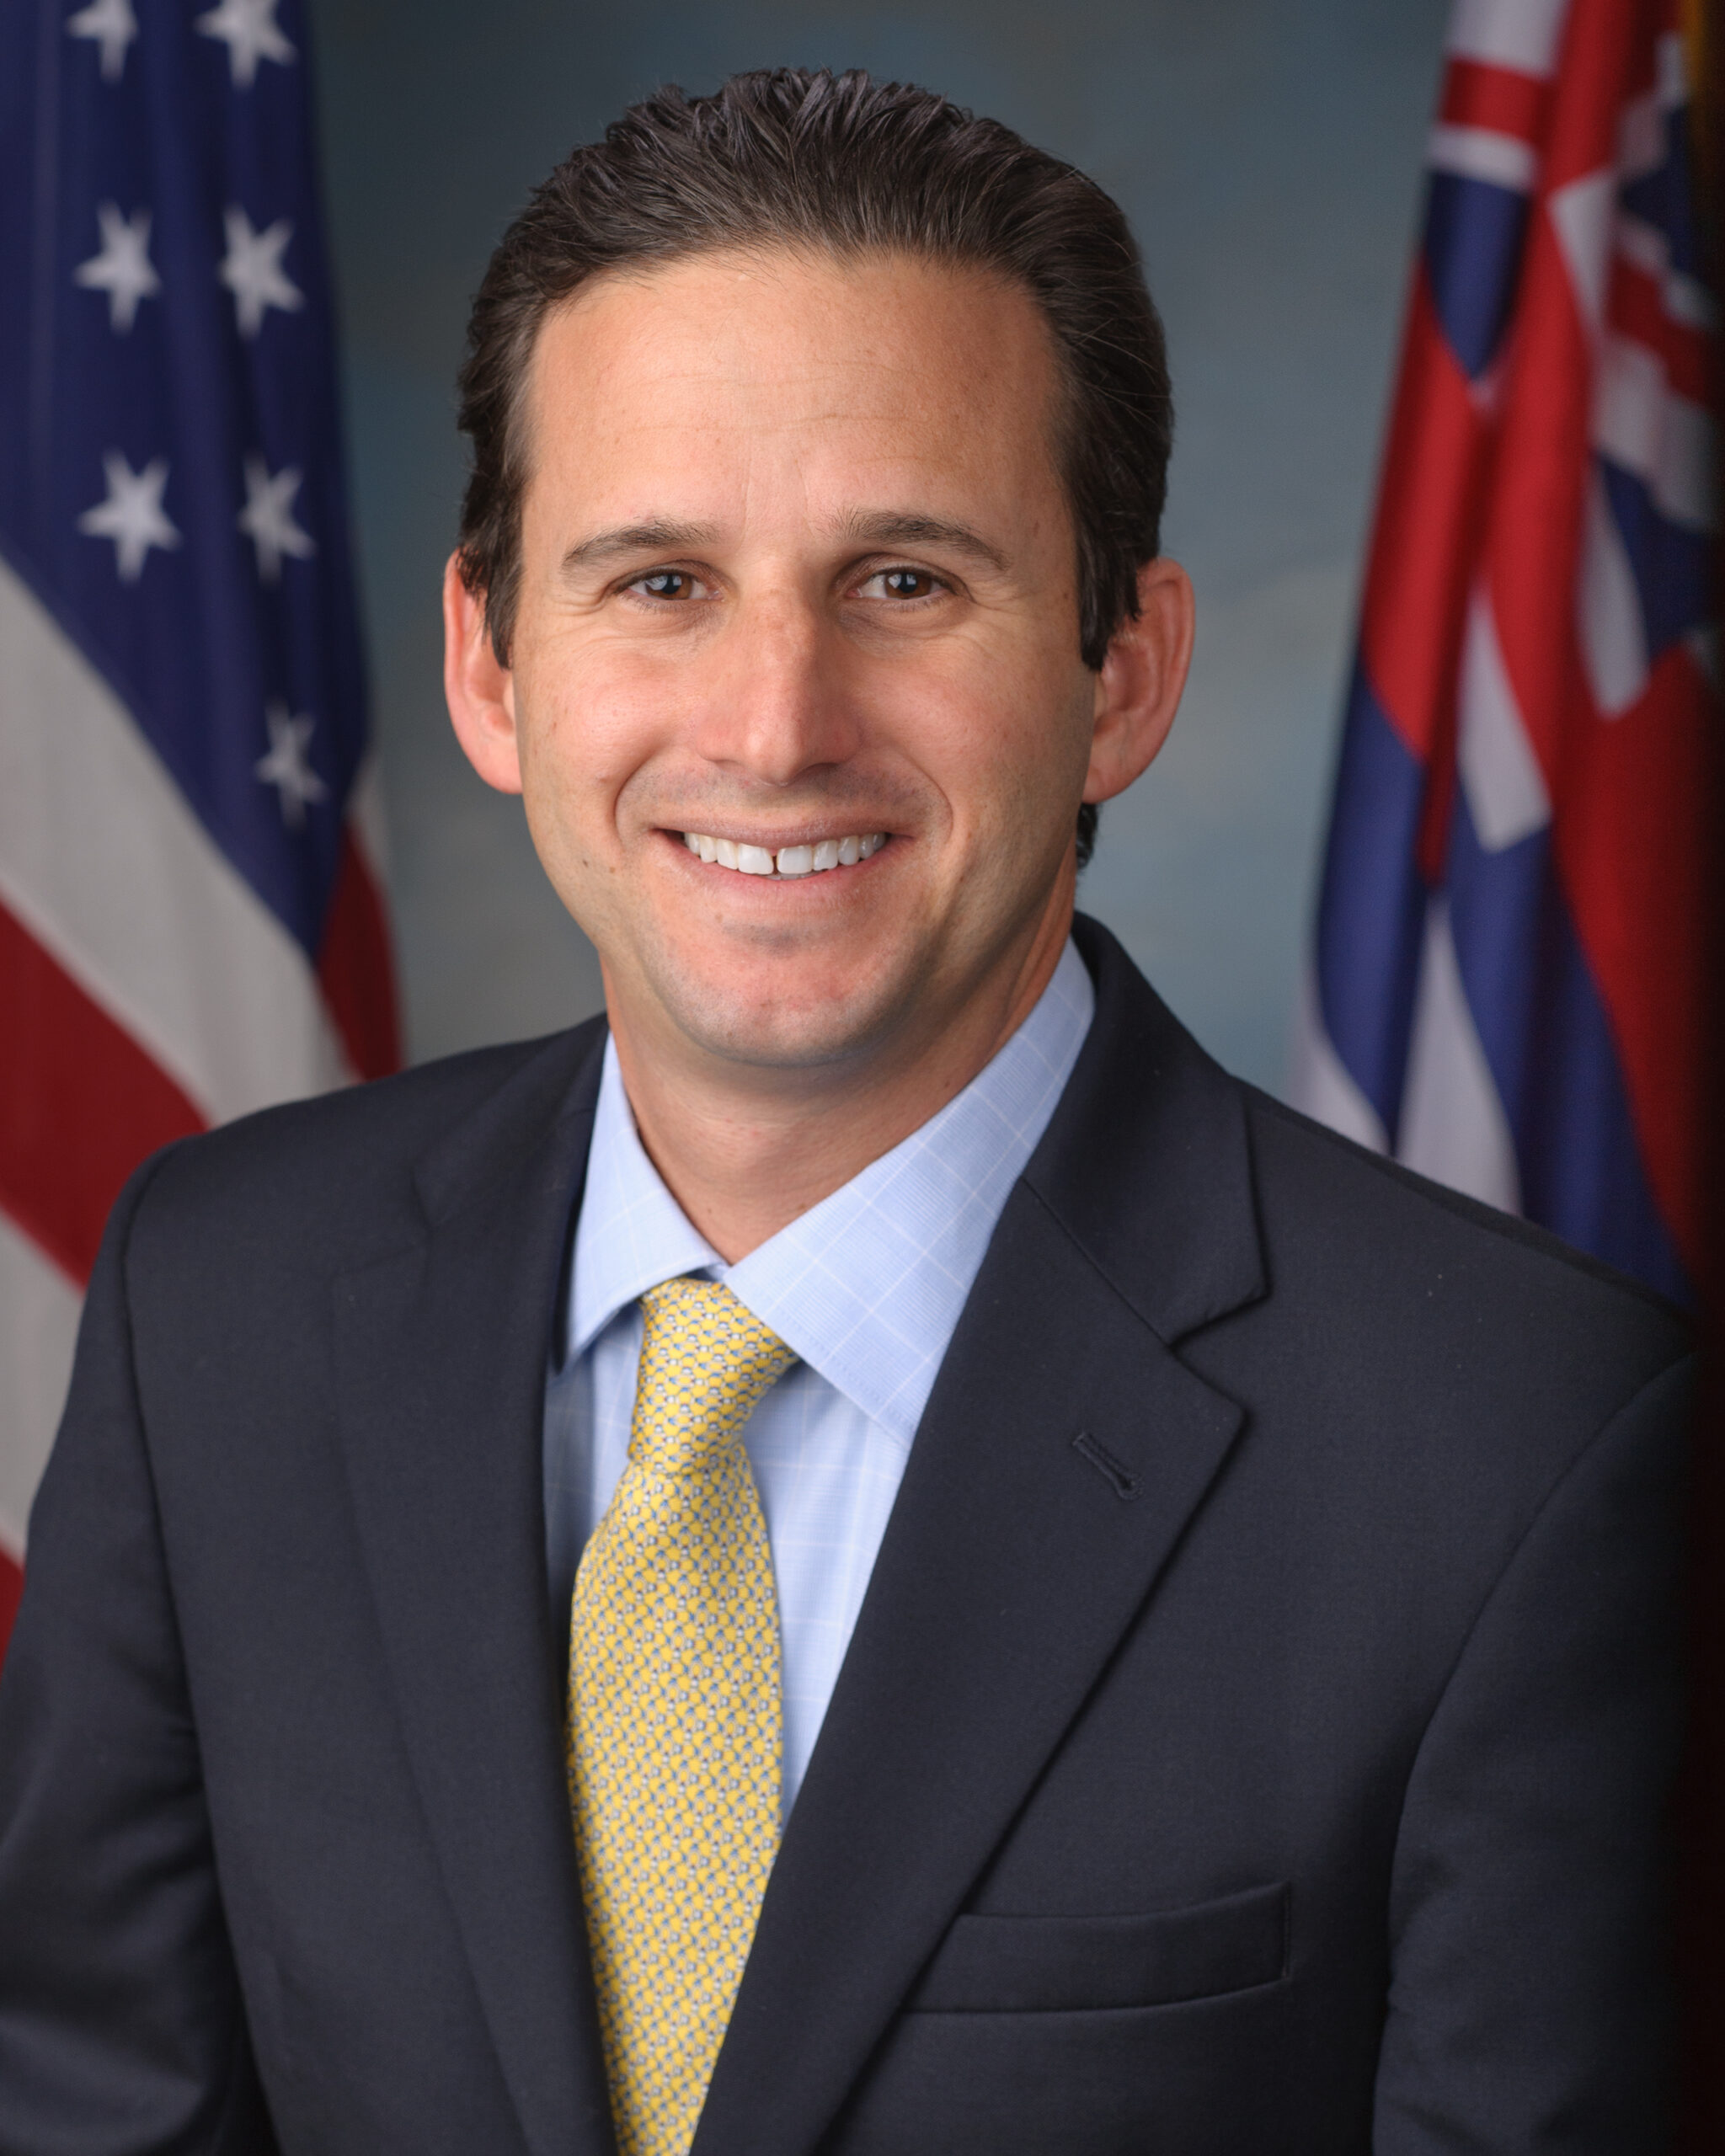 SCHATZ LEADS OVERSIGHT EARING ON THE 1866 RECONSTRUCTION AGREEMENT BETWEEN THE UNITED STATES AND THE OKLAHOMA TRIBE | United States Senate Committee on Indian Affairs